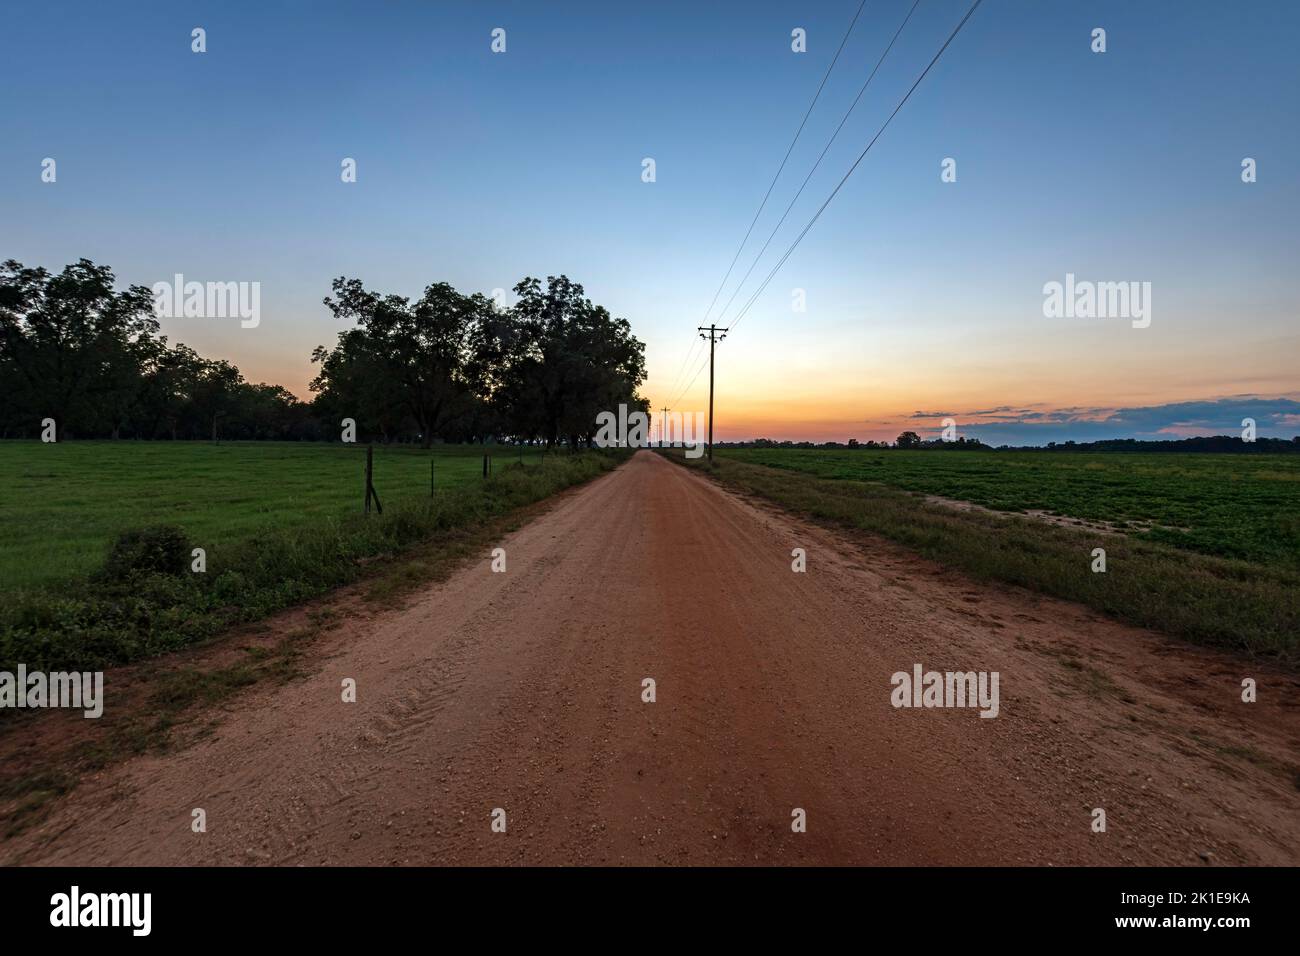 Empty red dirt road leading into the sunset with pasture on one side and peanut field on the other. Stock Photo